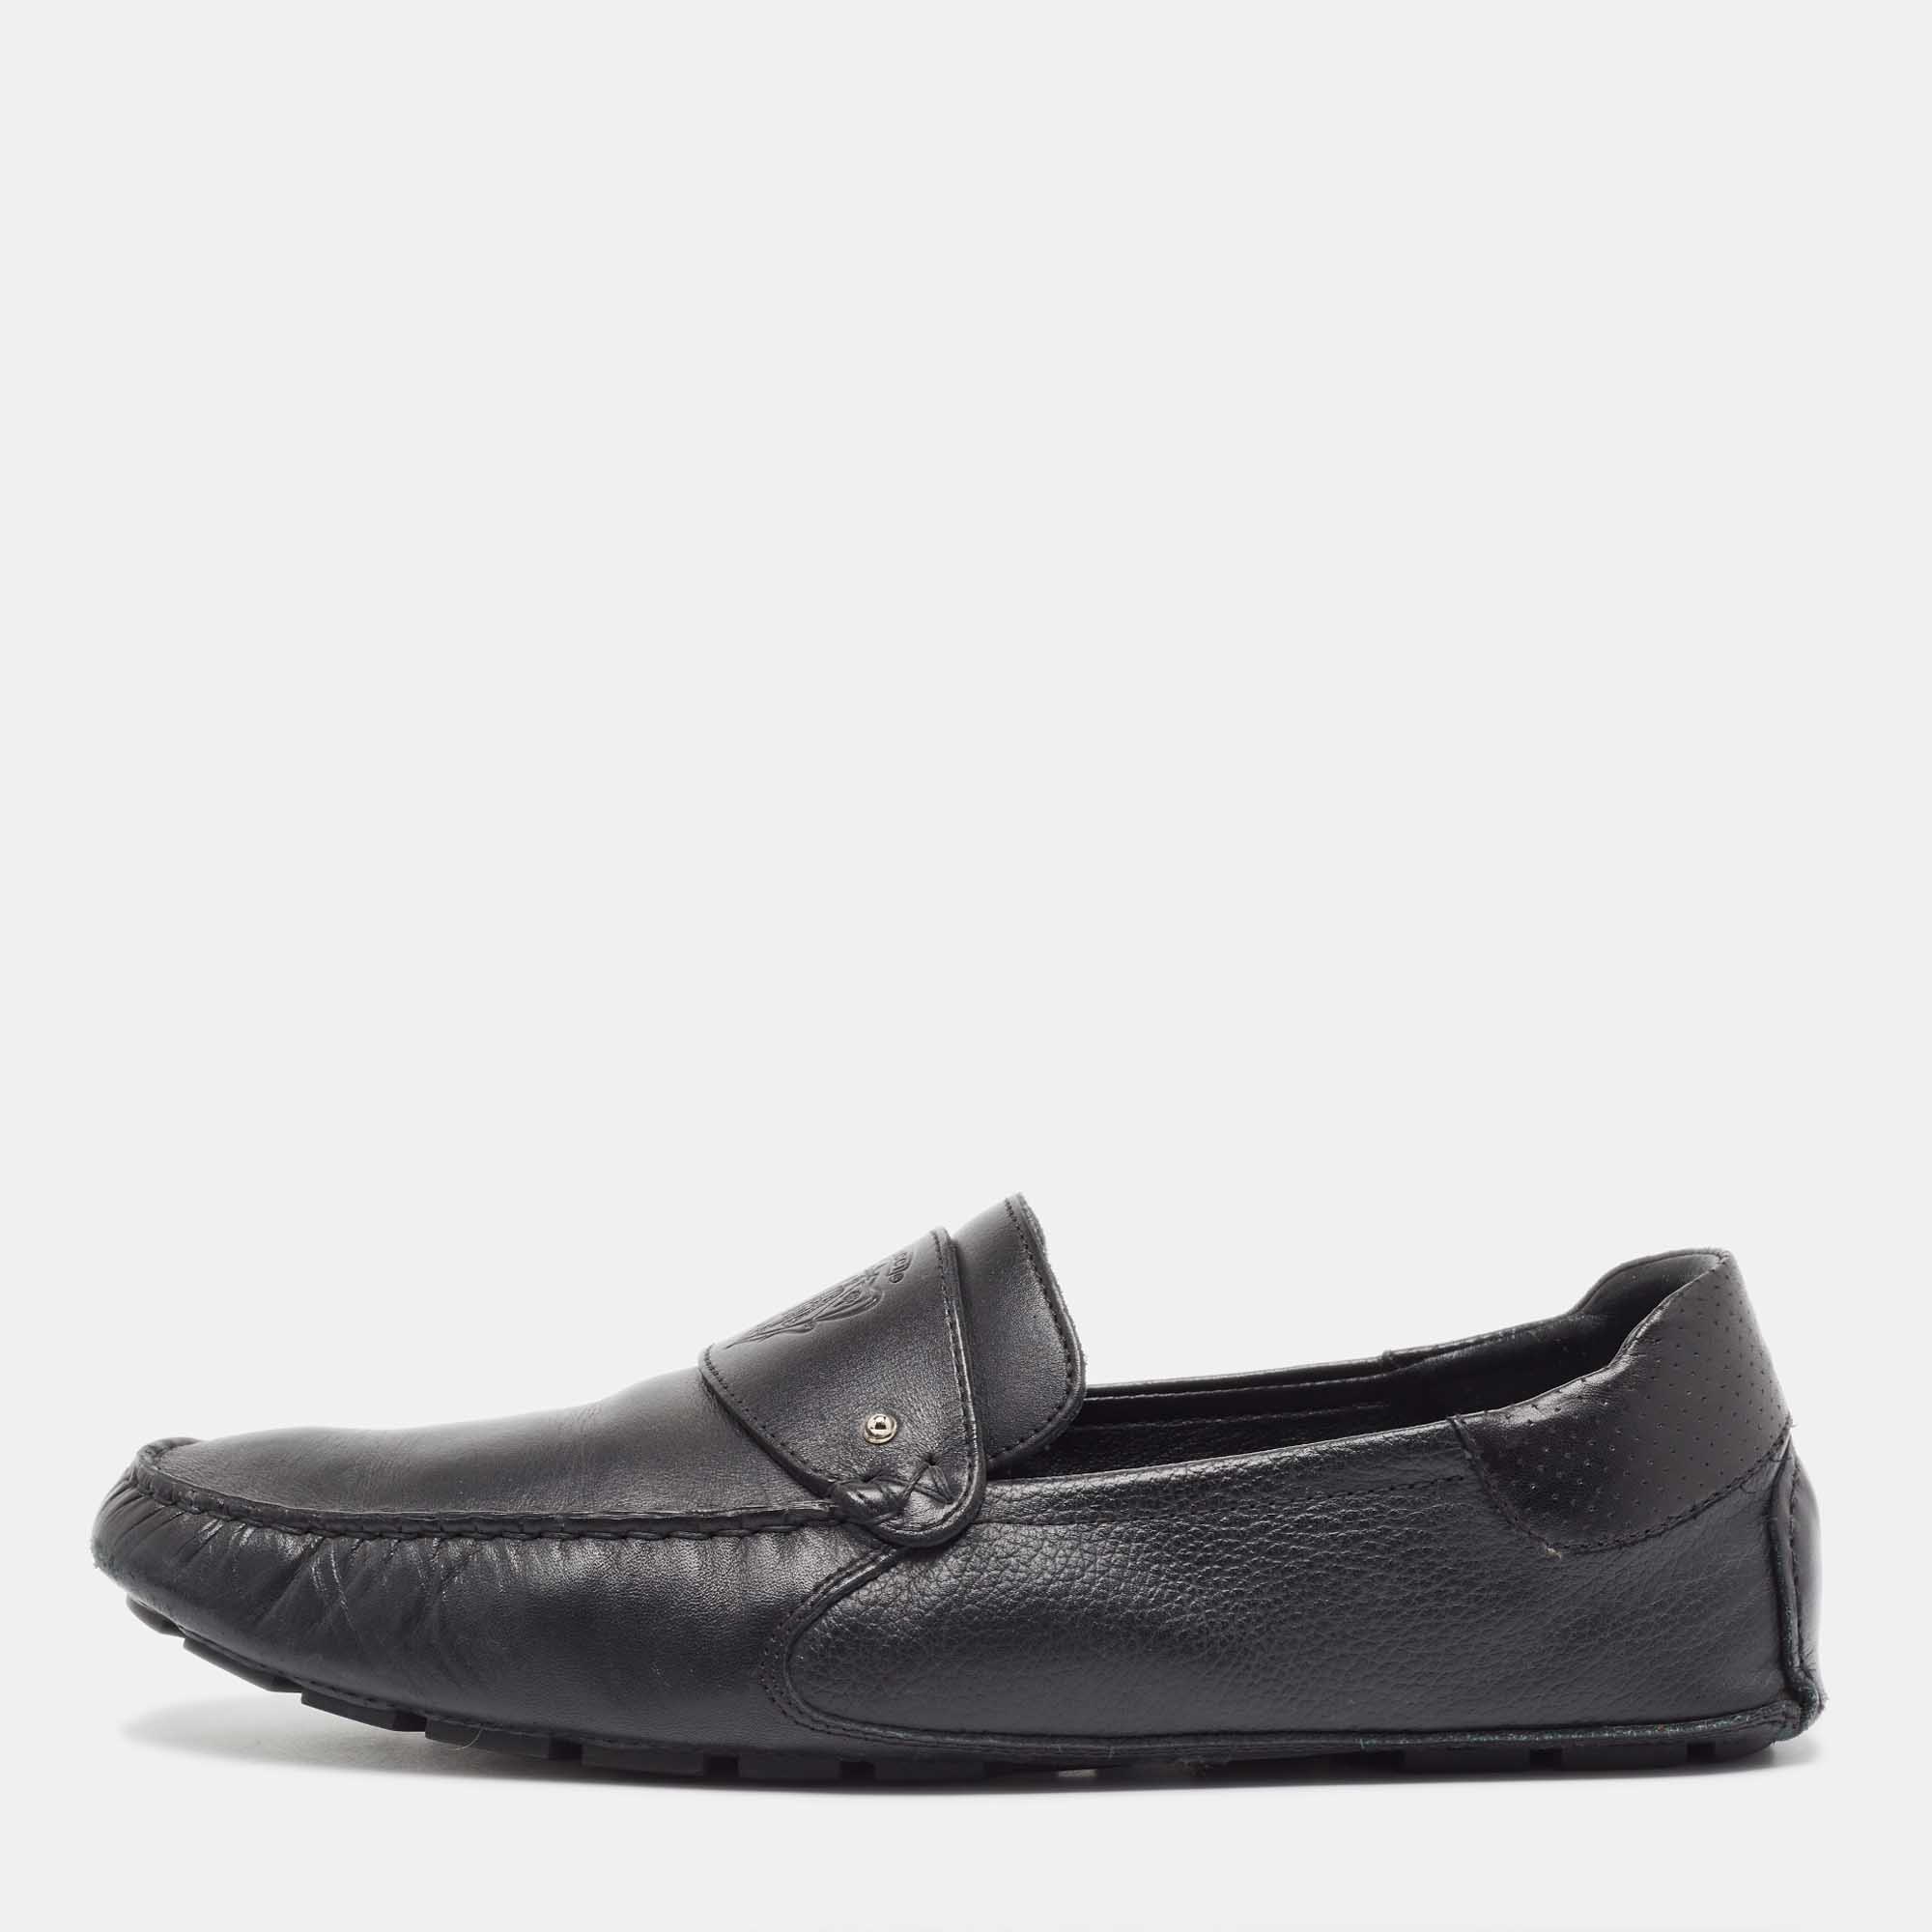 Pre-owned Gucci Black Leather Slip On Loafers Size 44.5